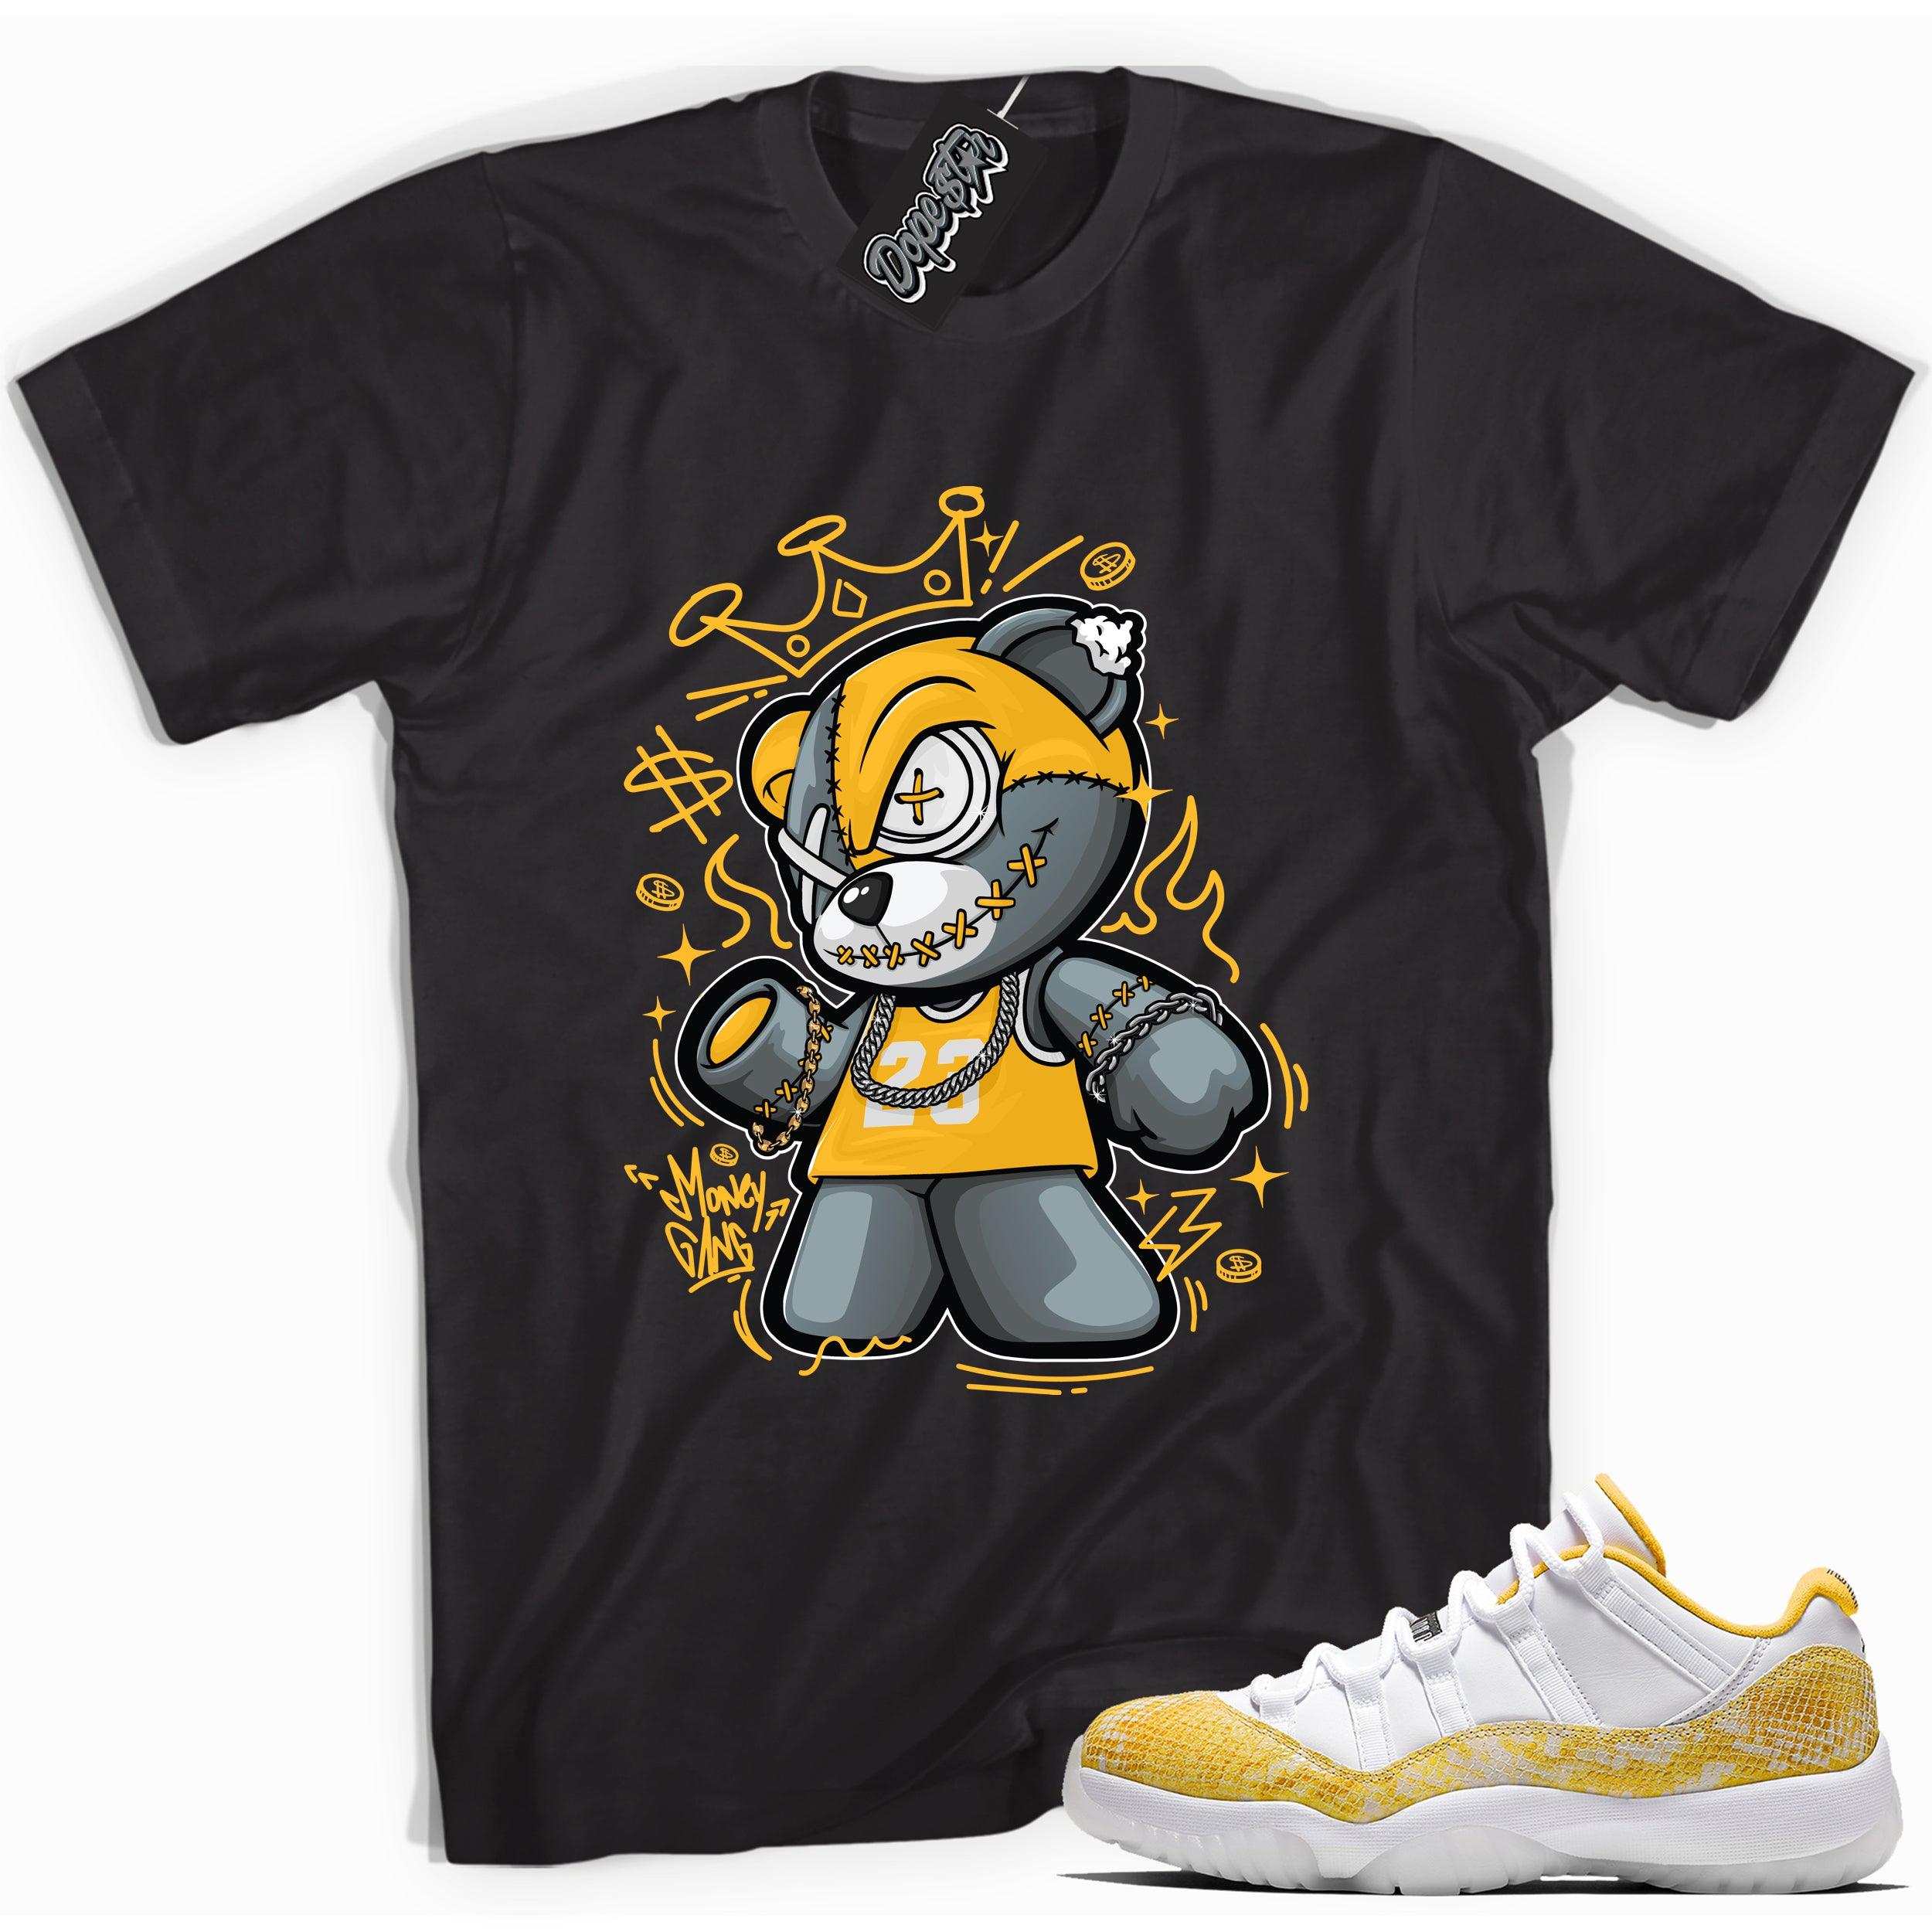 Cool black graphic tee with 'money gang bear' print, that perfectly matches  Air Jordan 11 Retro Low Yellow Snakeskin sneakers